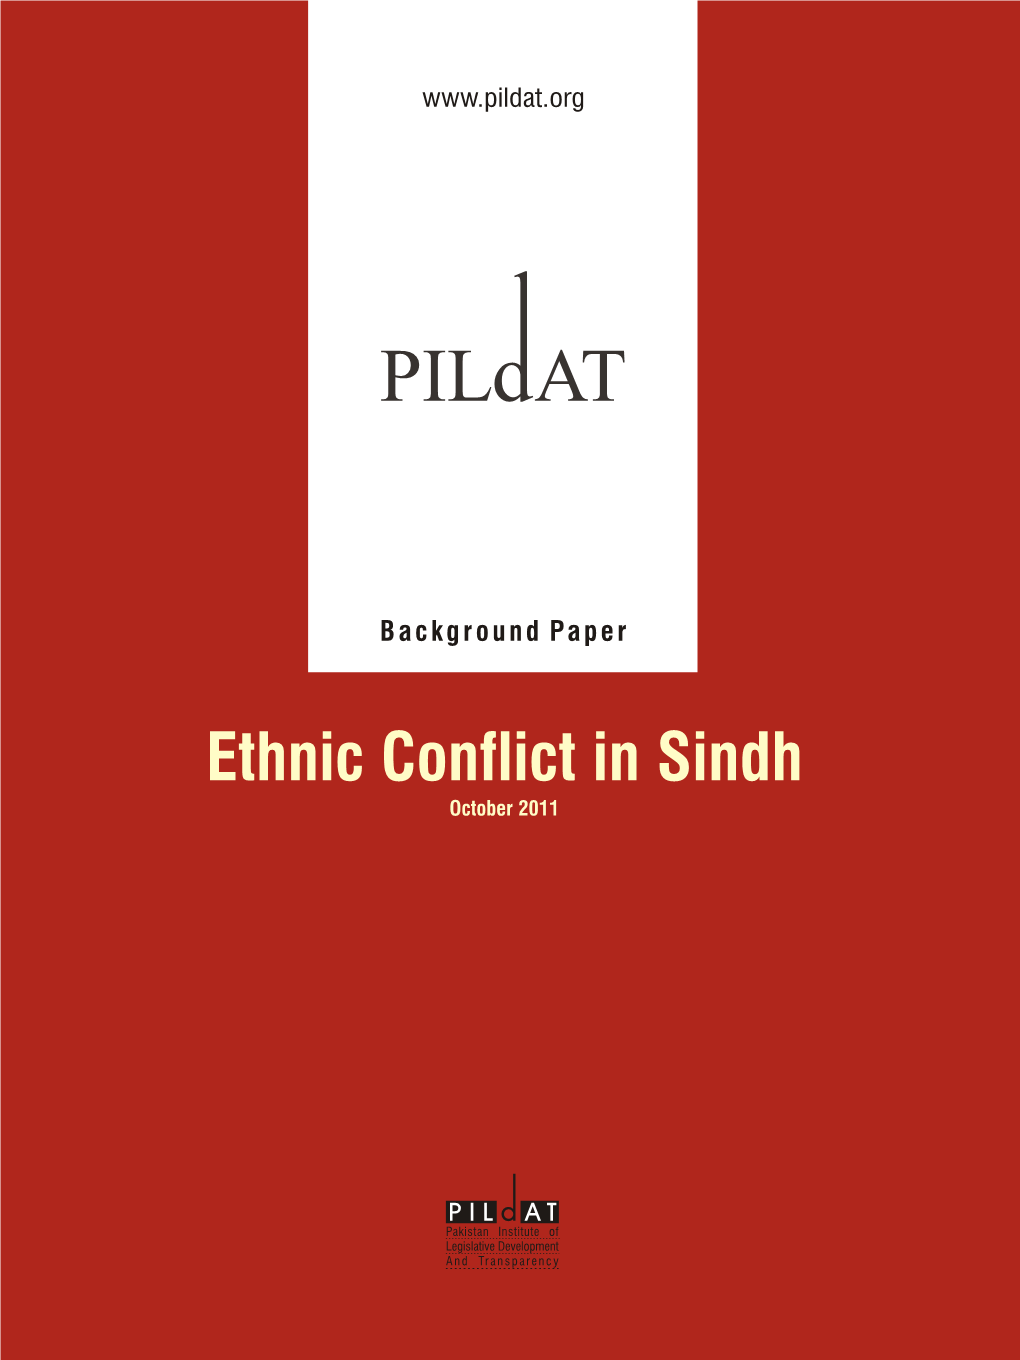 Ethnic Conflict in Sindh October 2011 Background Paper